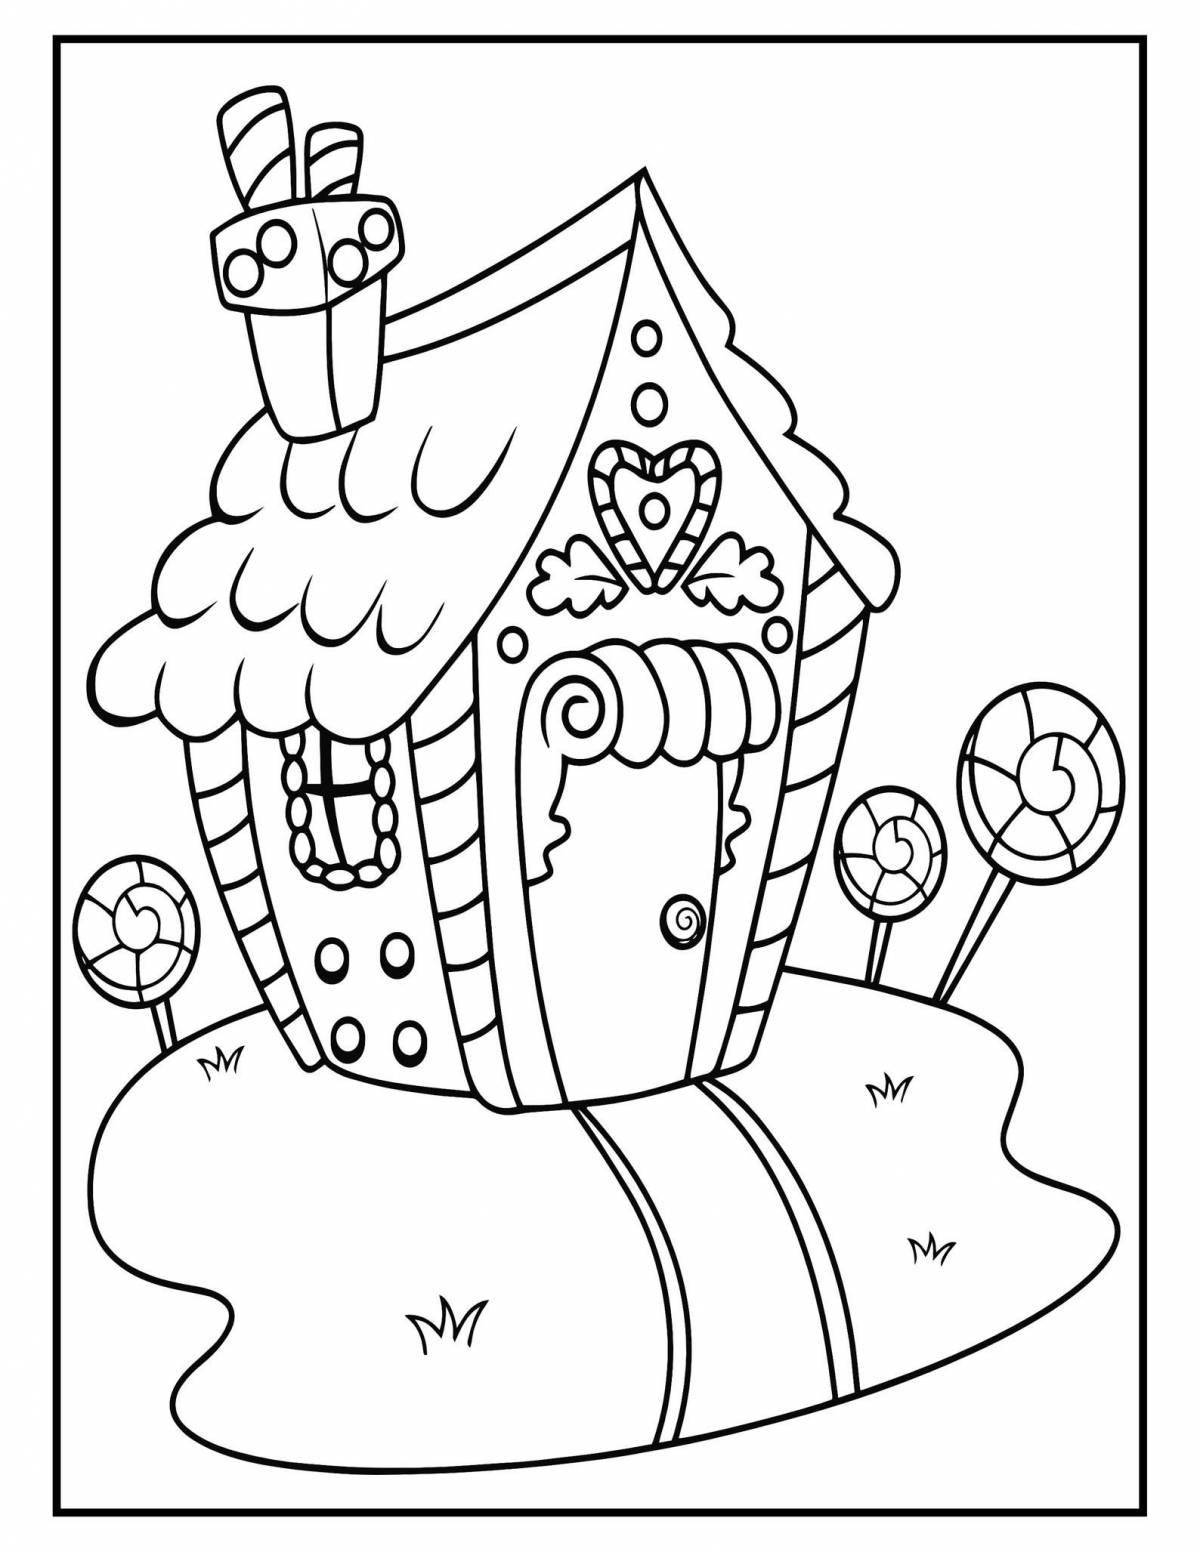 Playtime hut coloring book for kids